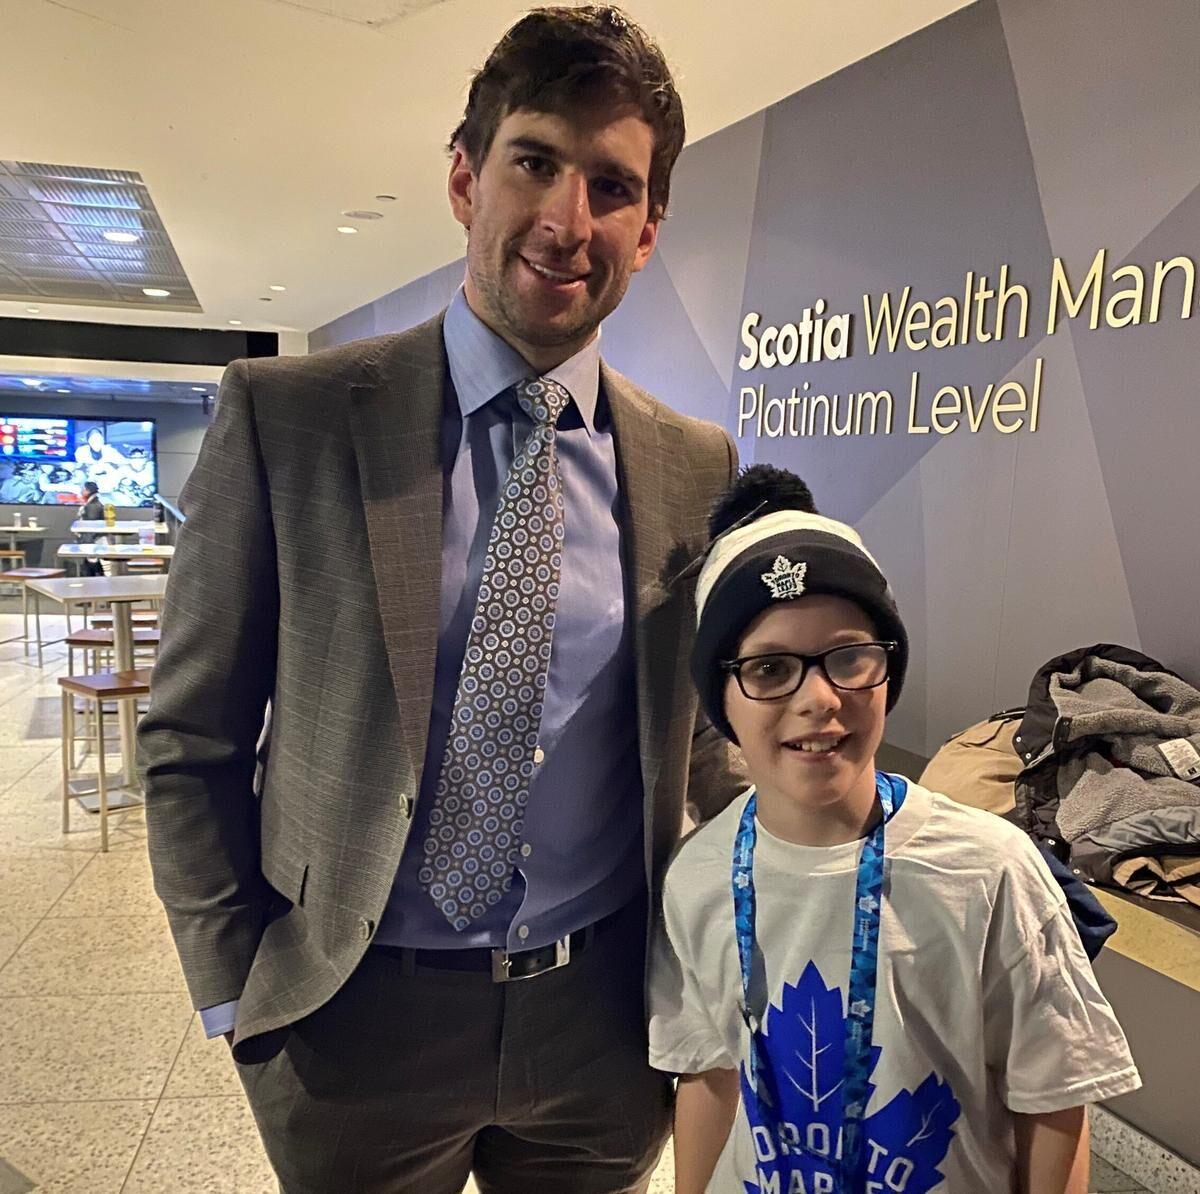 John Tavares of the Toronto Maple Leafs poses with his jersey